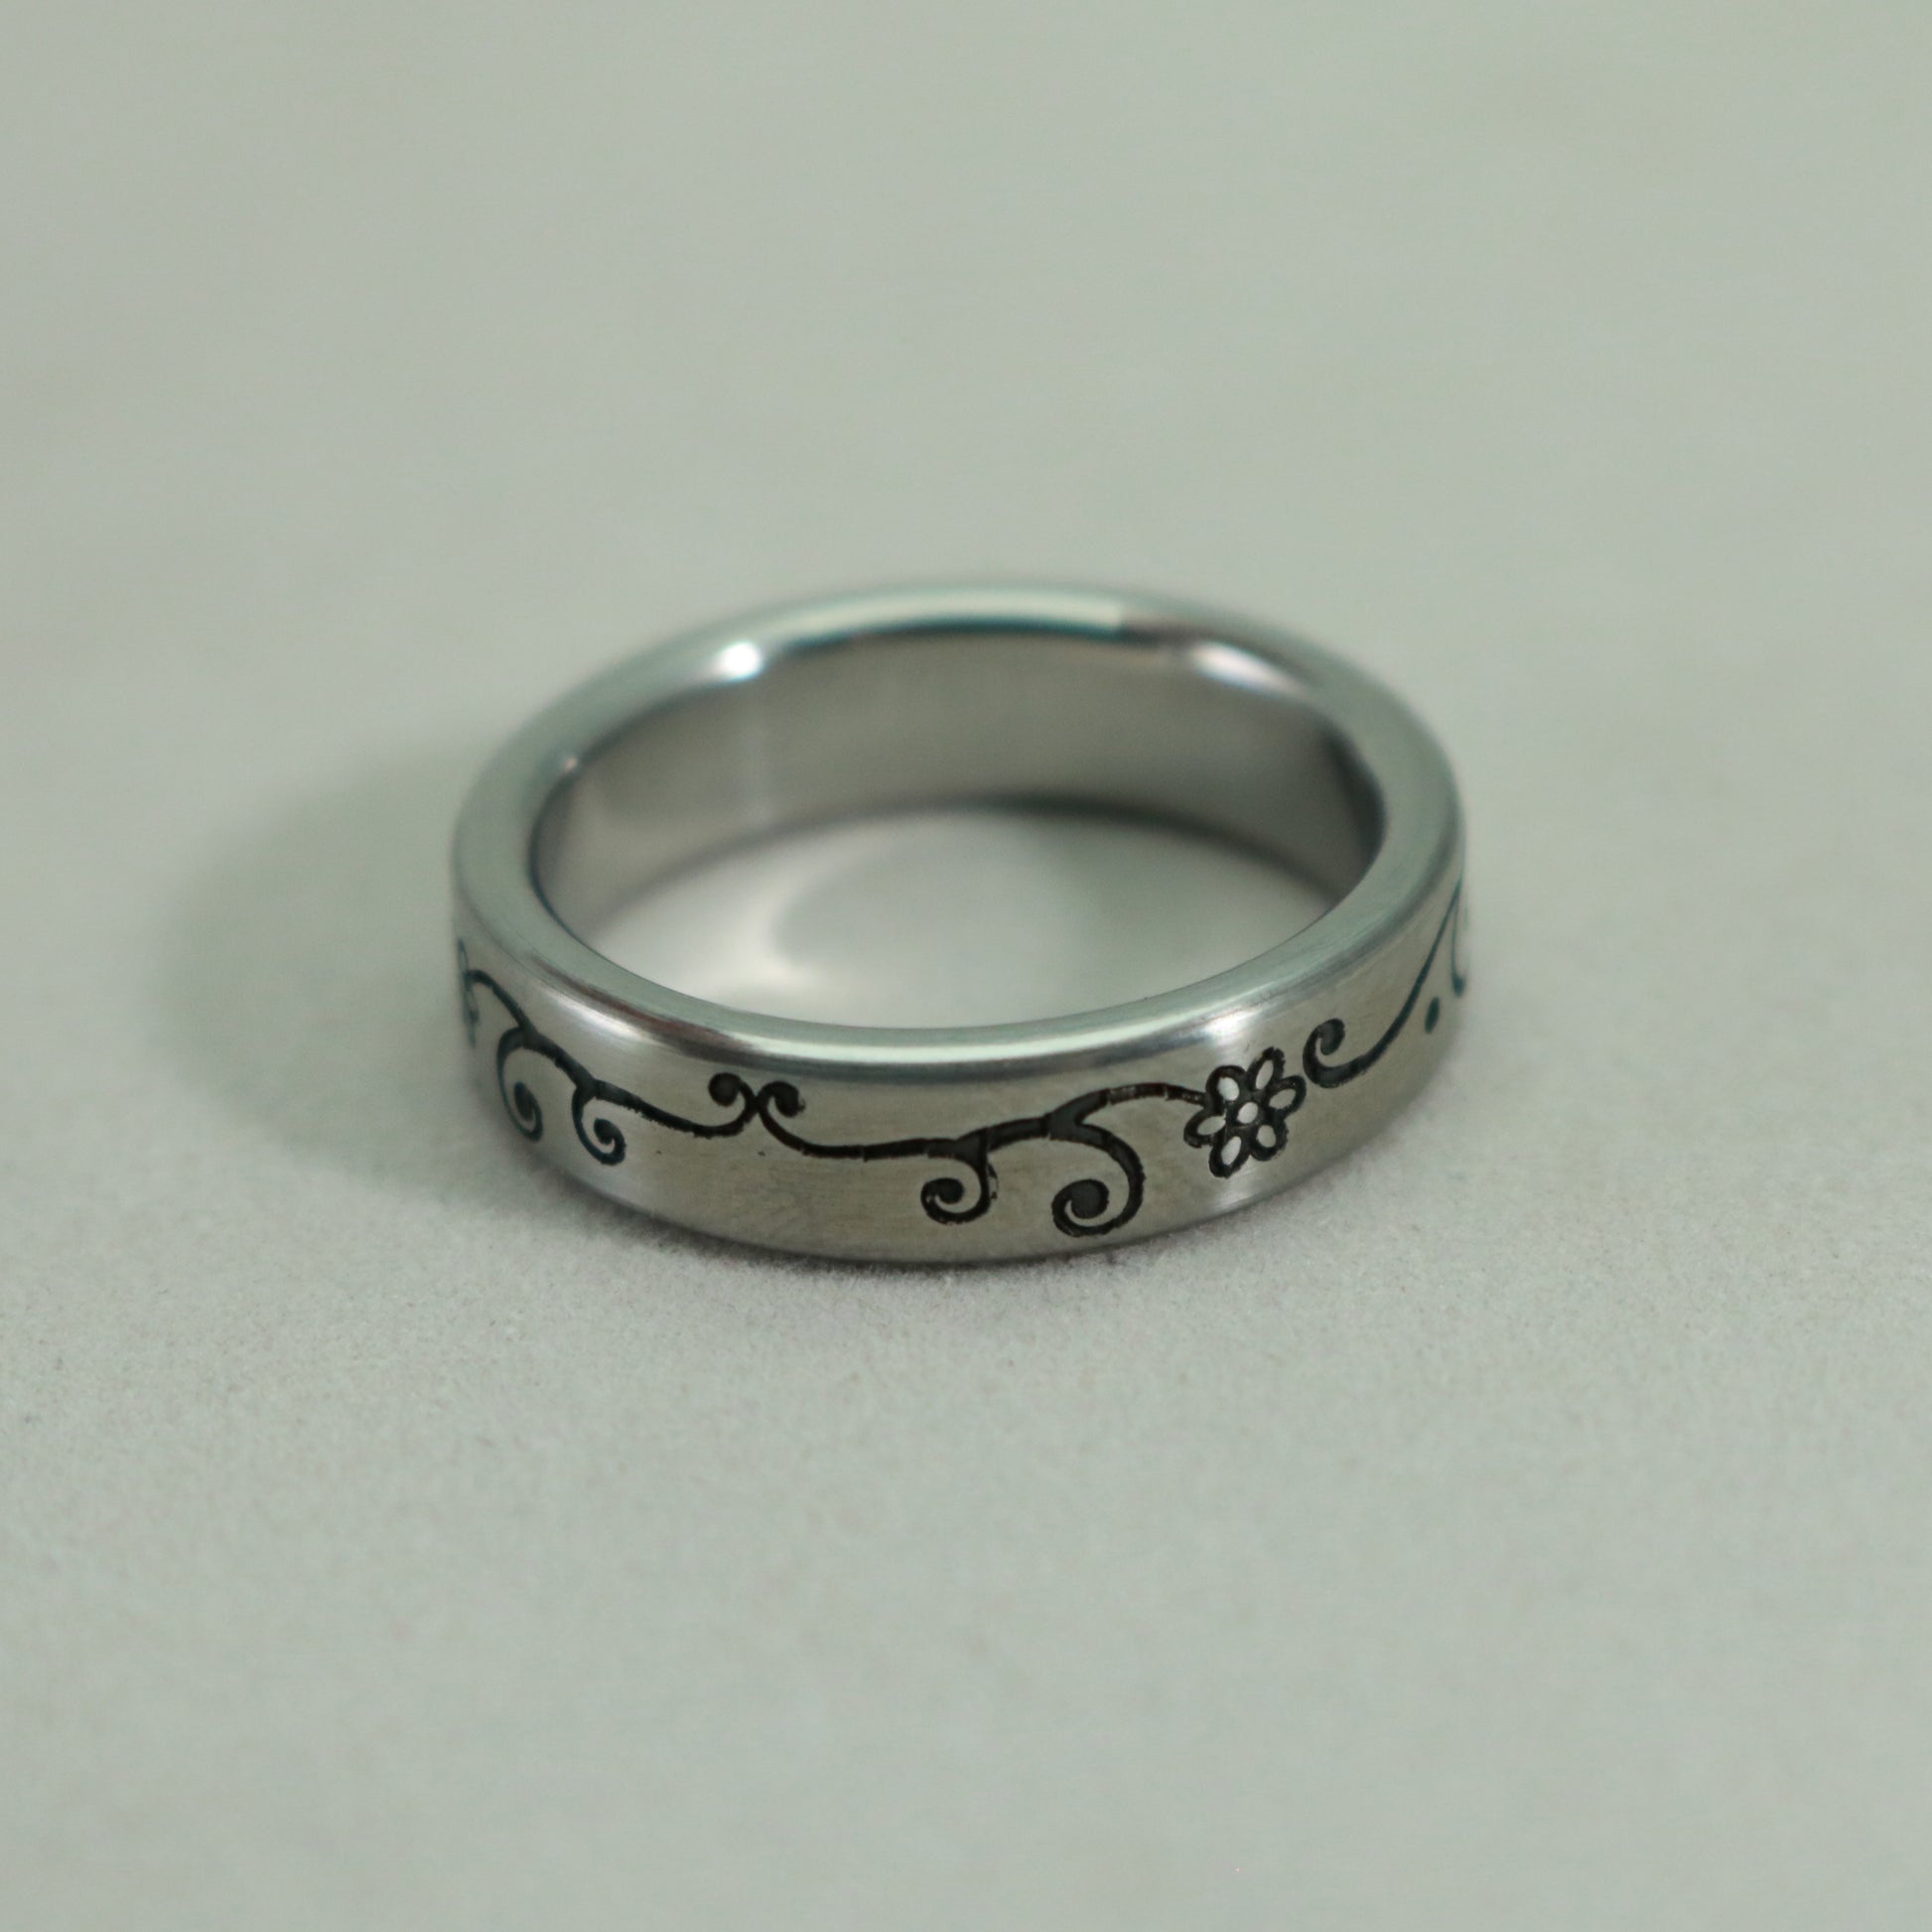 Band is .2 in wide in this lovely laser engraved stainless steel ring by Kemner Design